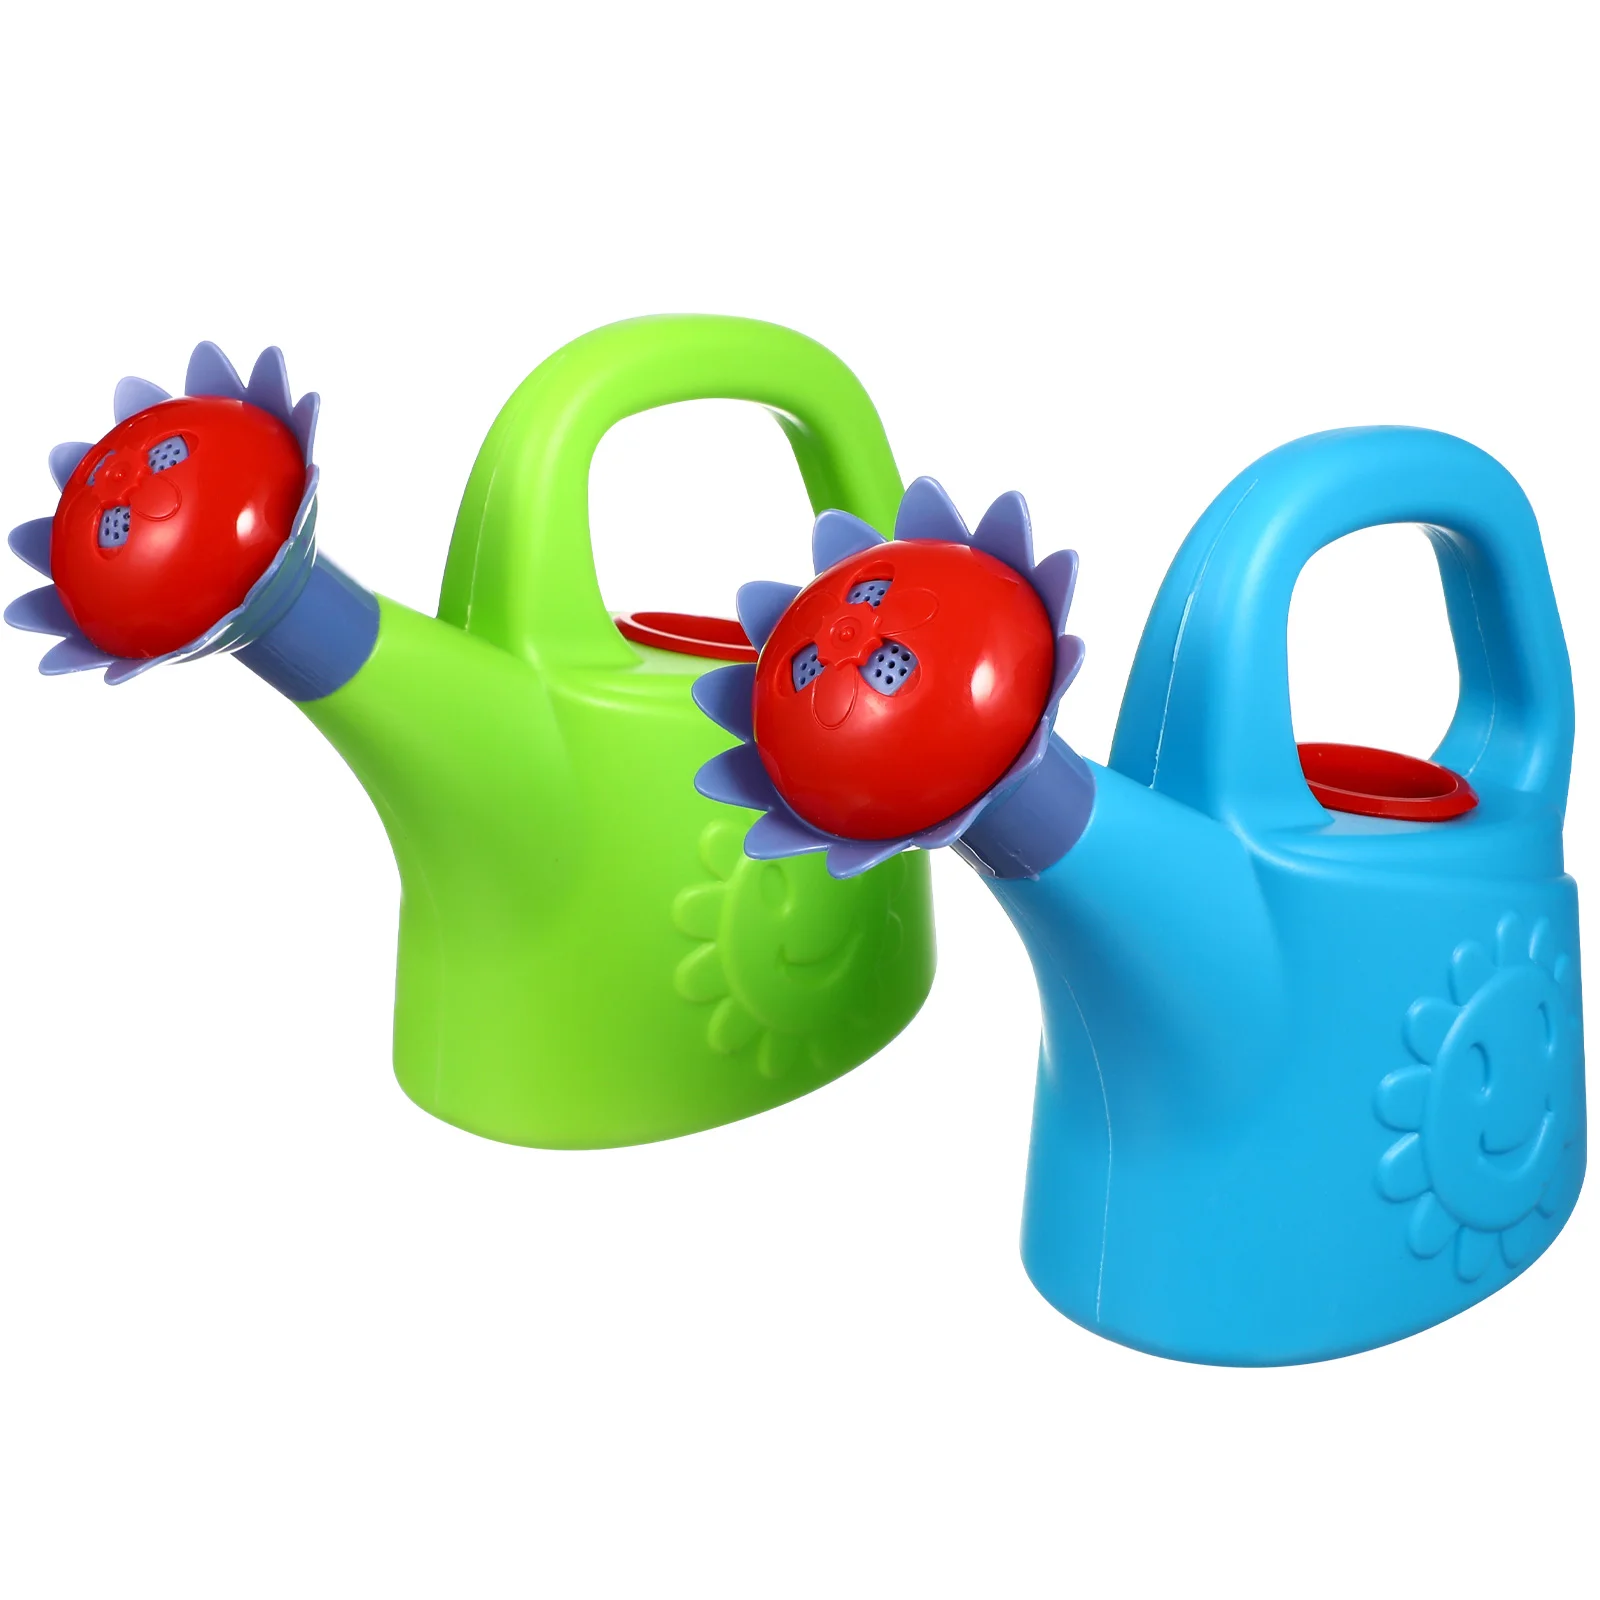 

Toyvian 2PCS Plastic Chicken Watering Can Toys Interesting Children Bath Toys Play House Watering Can Toys Early Educational